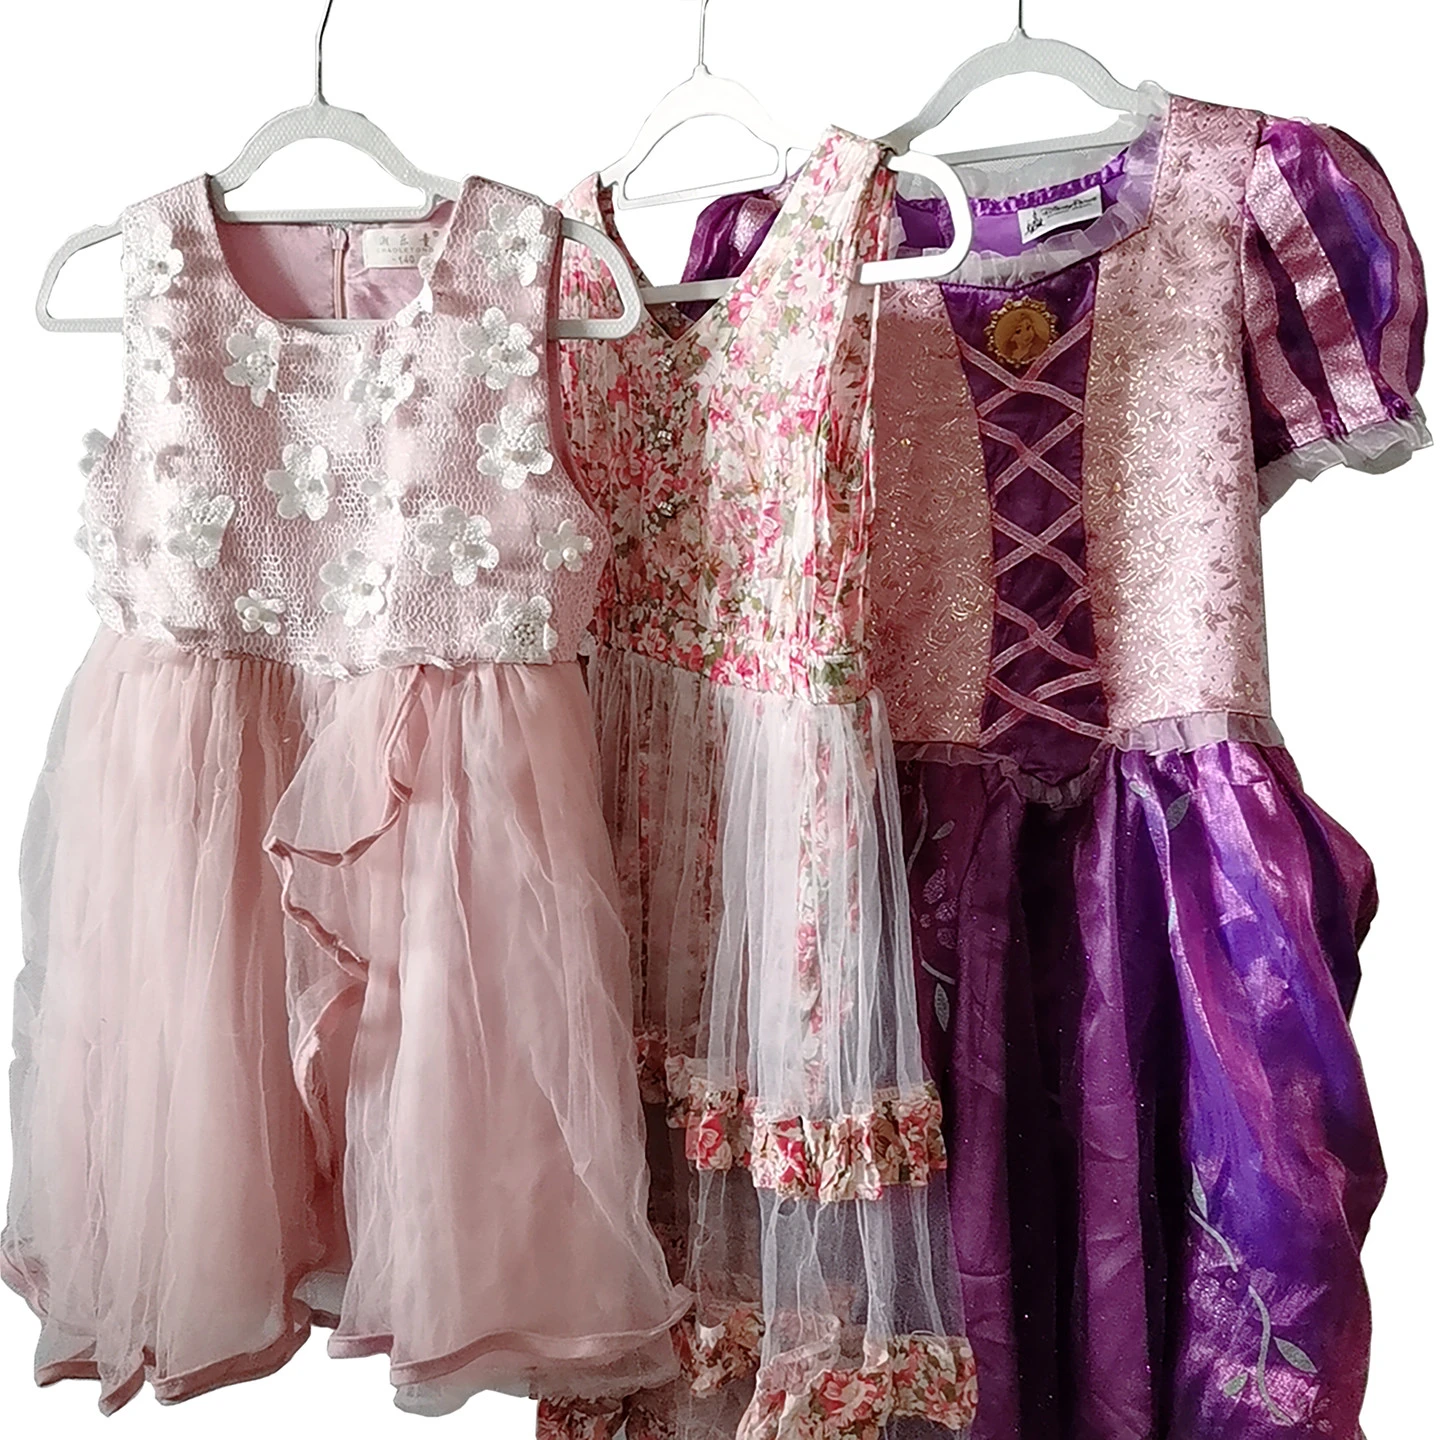 Free Sample Children Dress Second Hand Clothes from China within 1 kg